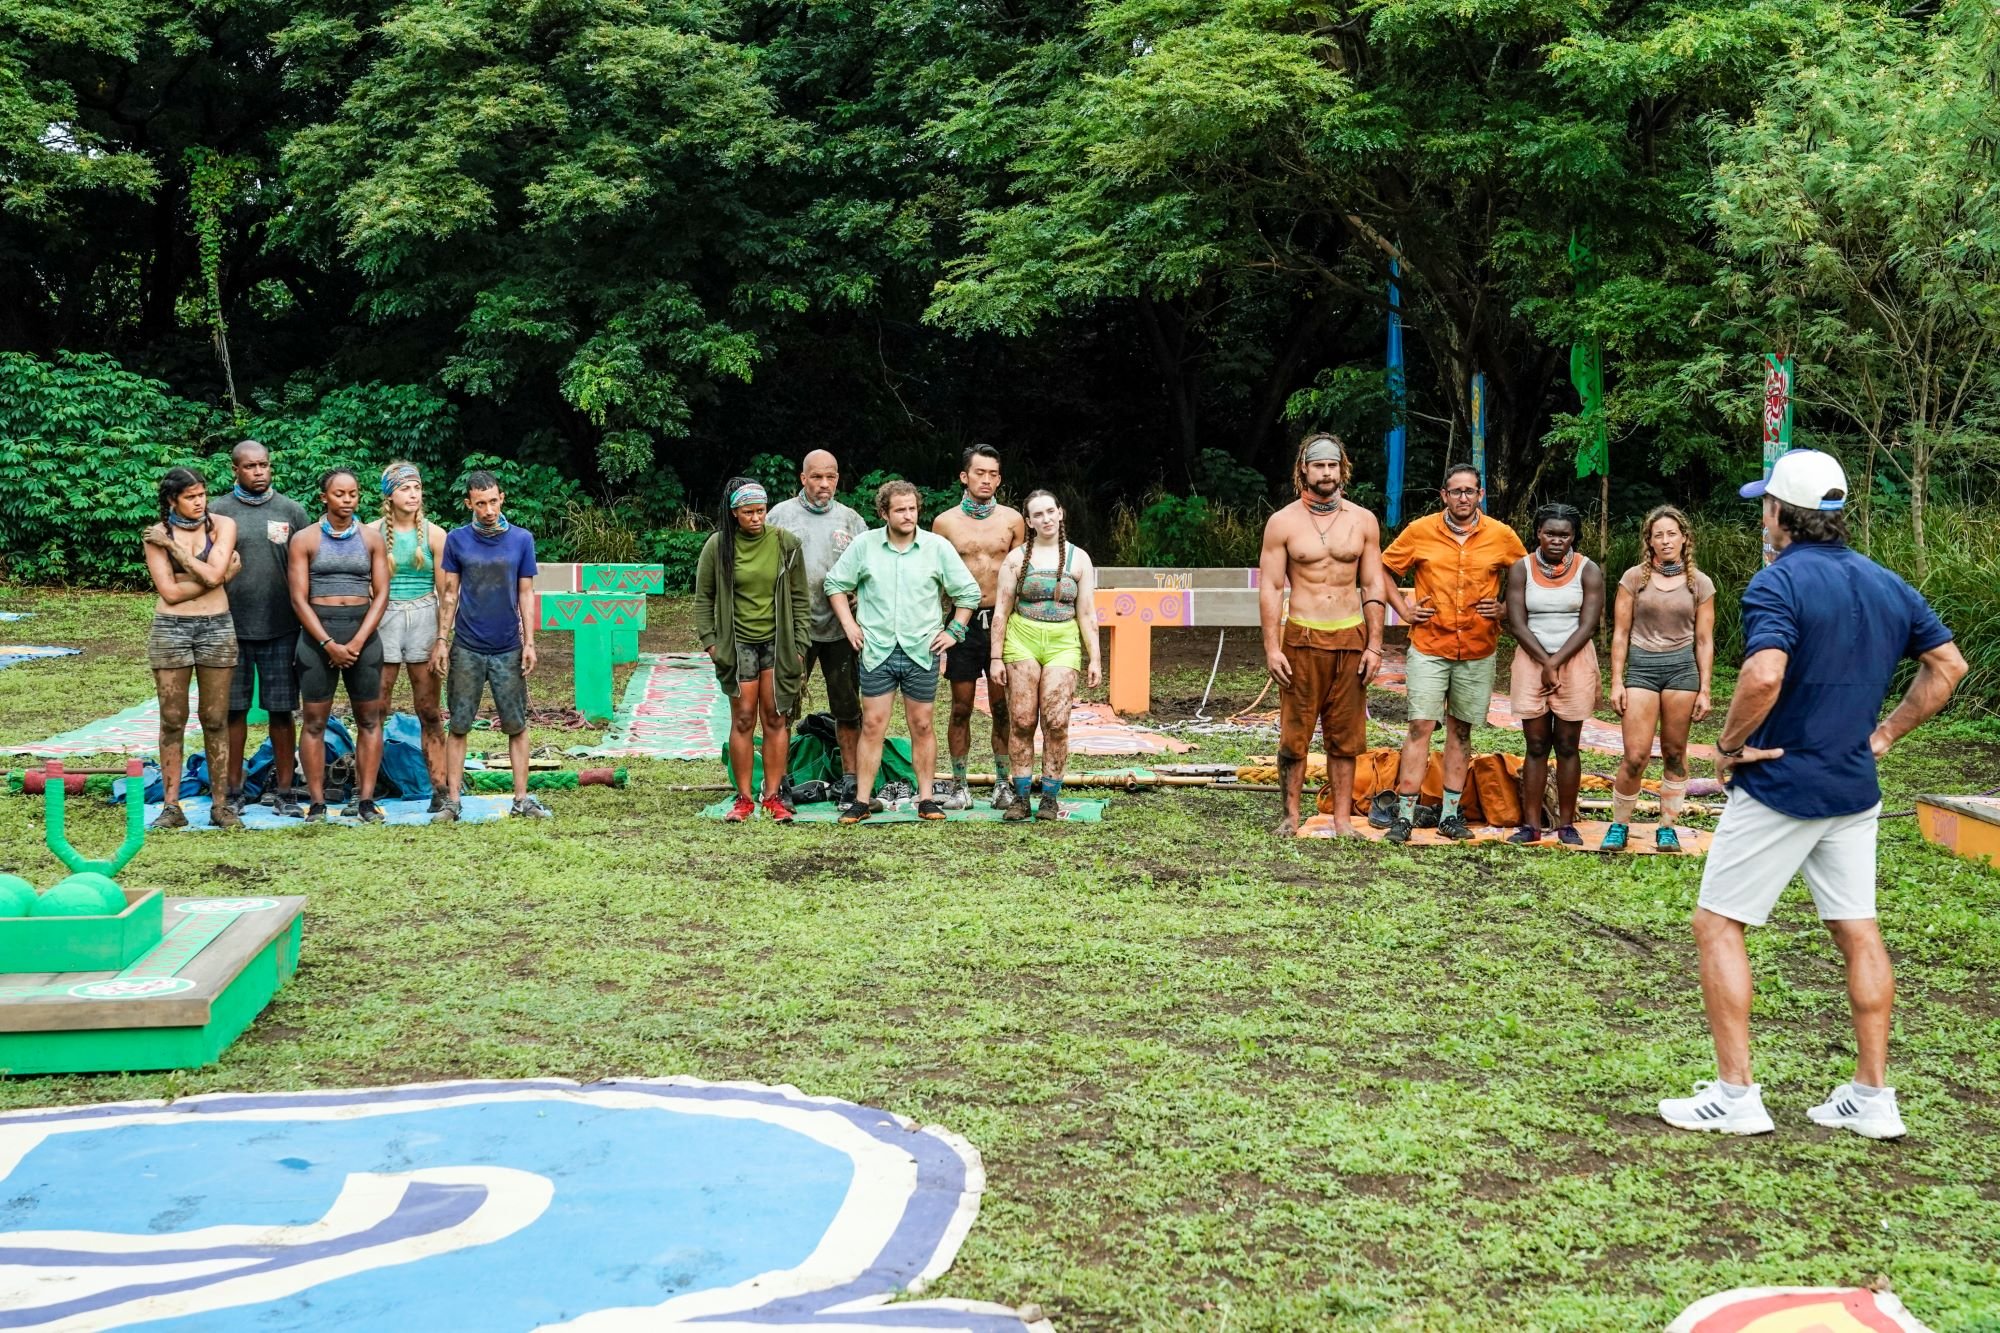 The three tribes of 'Survivor' Season 42 stand on their individual mats and listen to Jeff Probst speak during the immunity challenge.